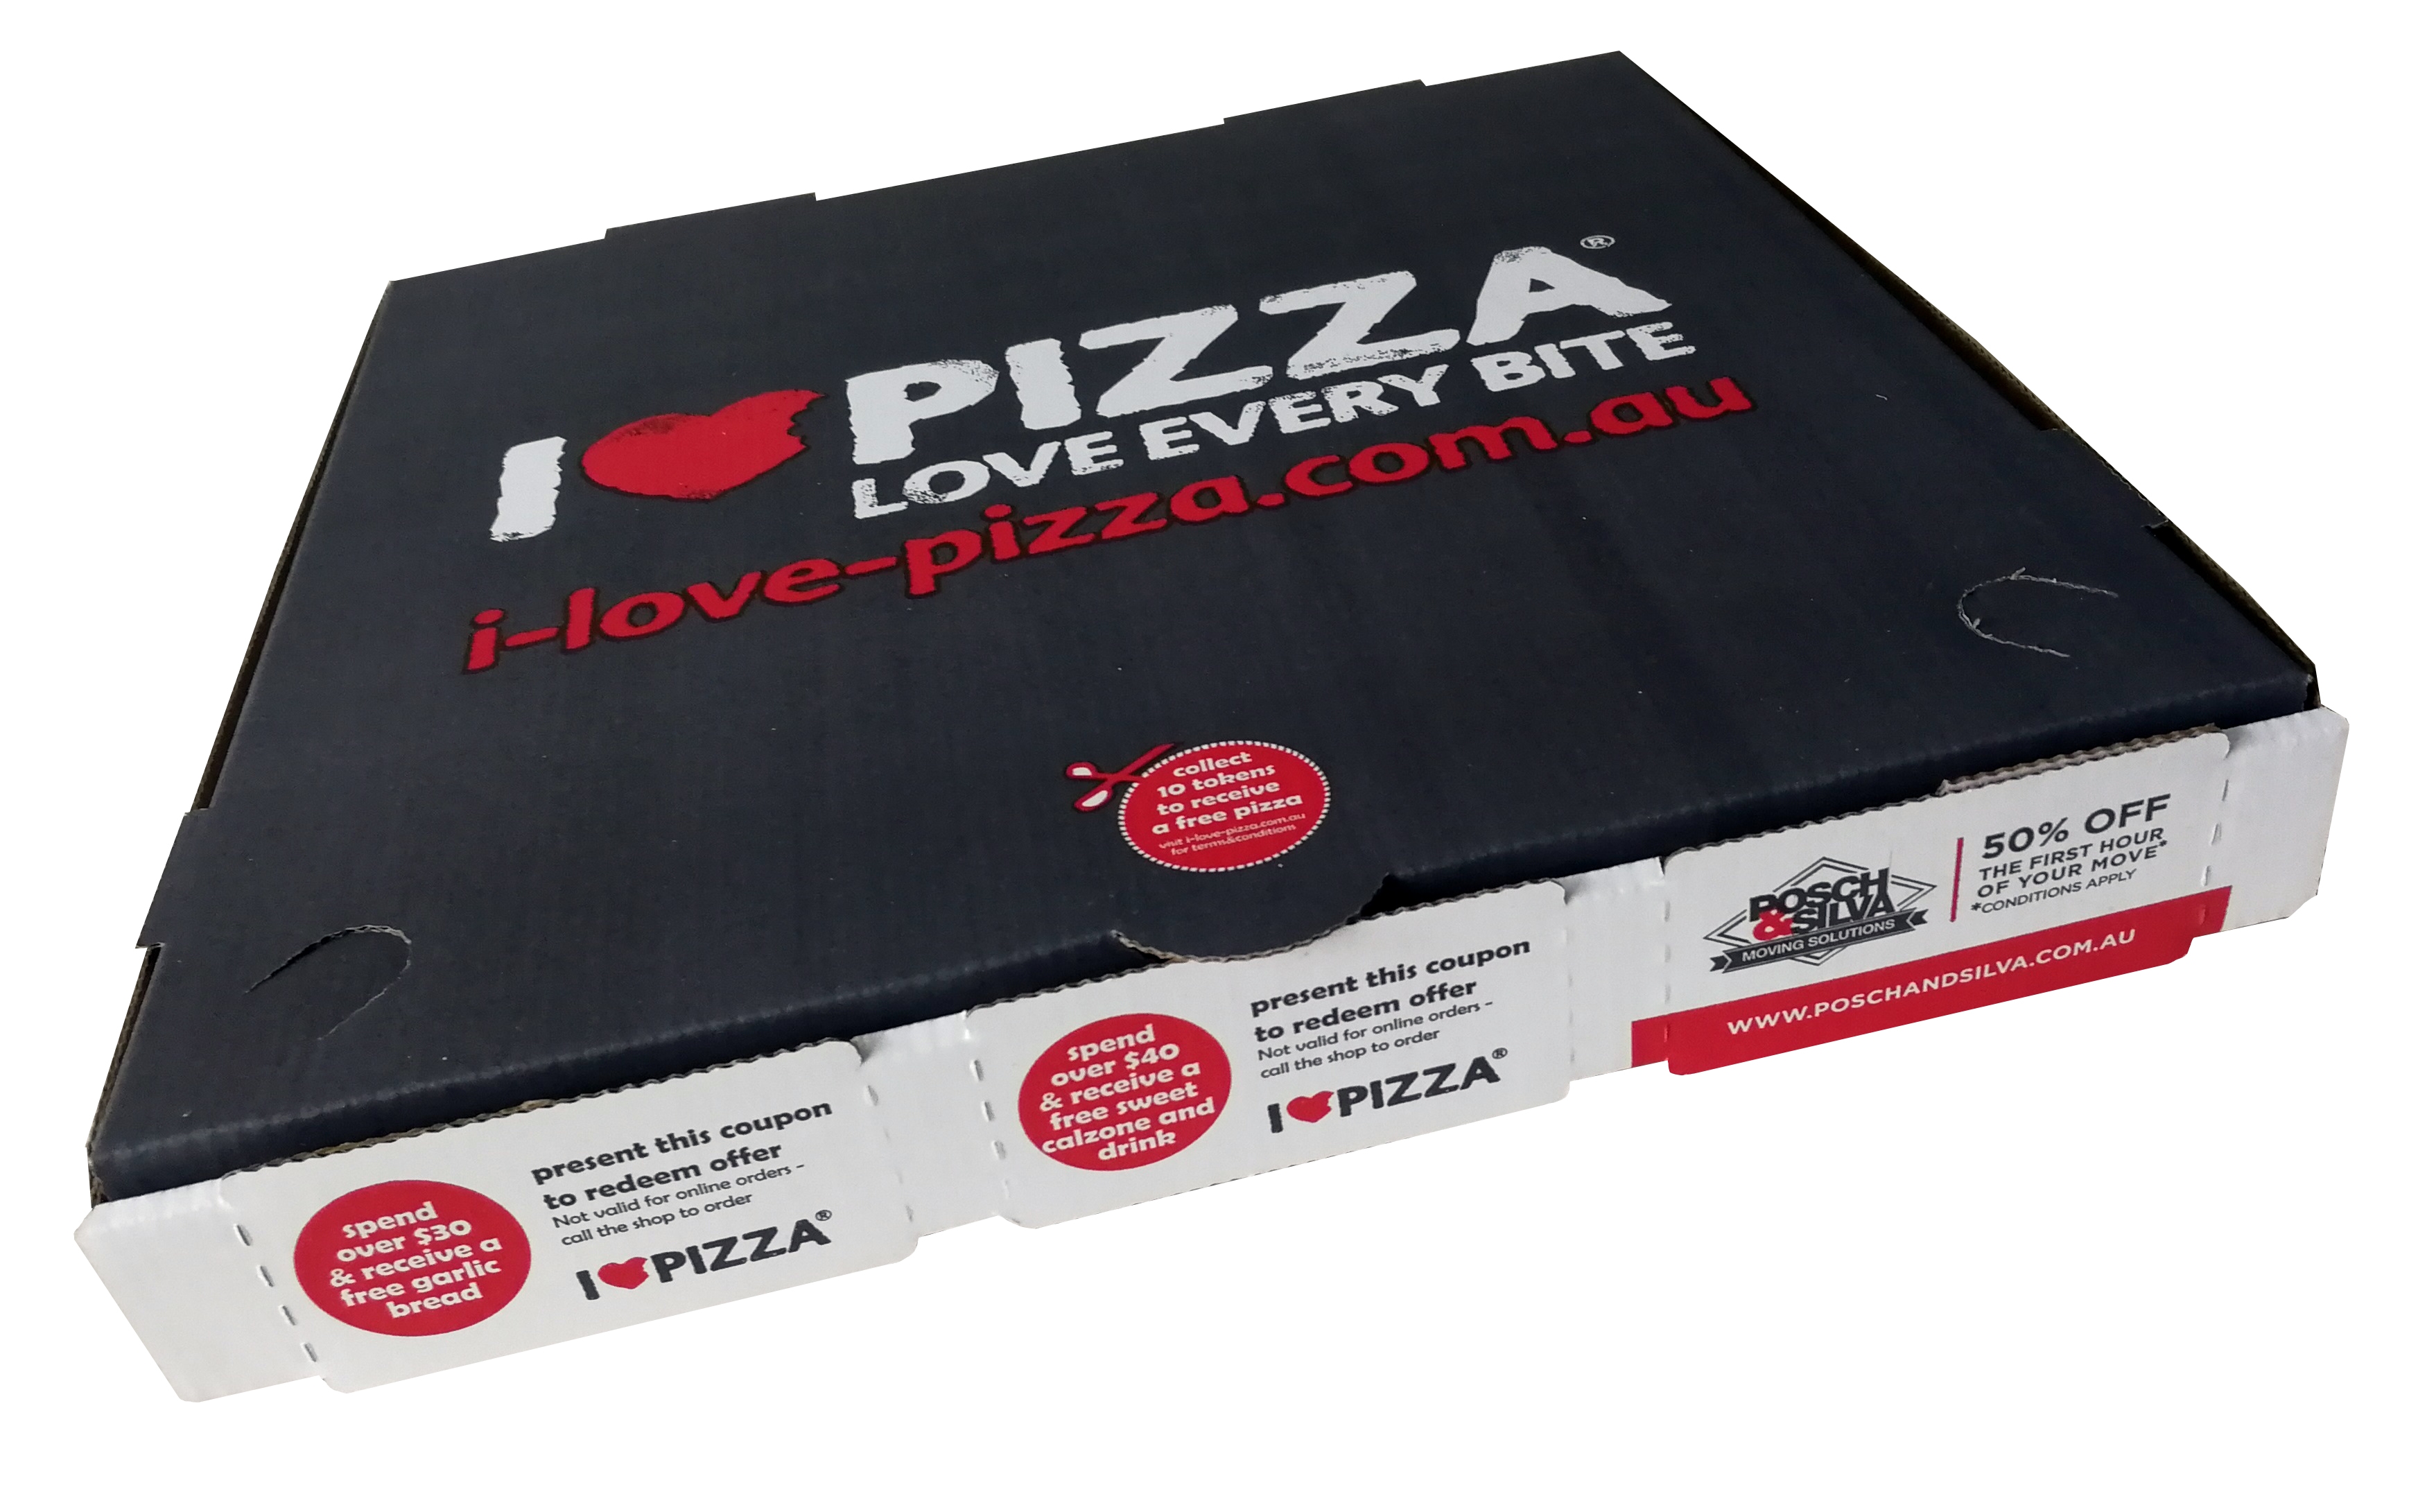 Custom Printed Pizza Boxes and Packaging